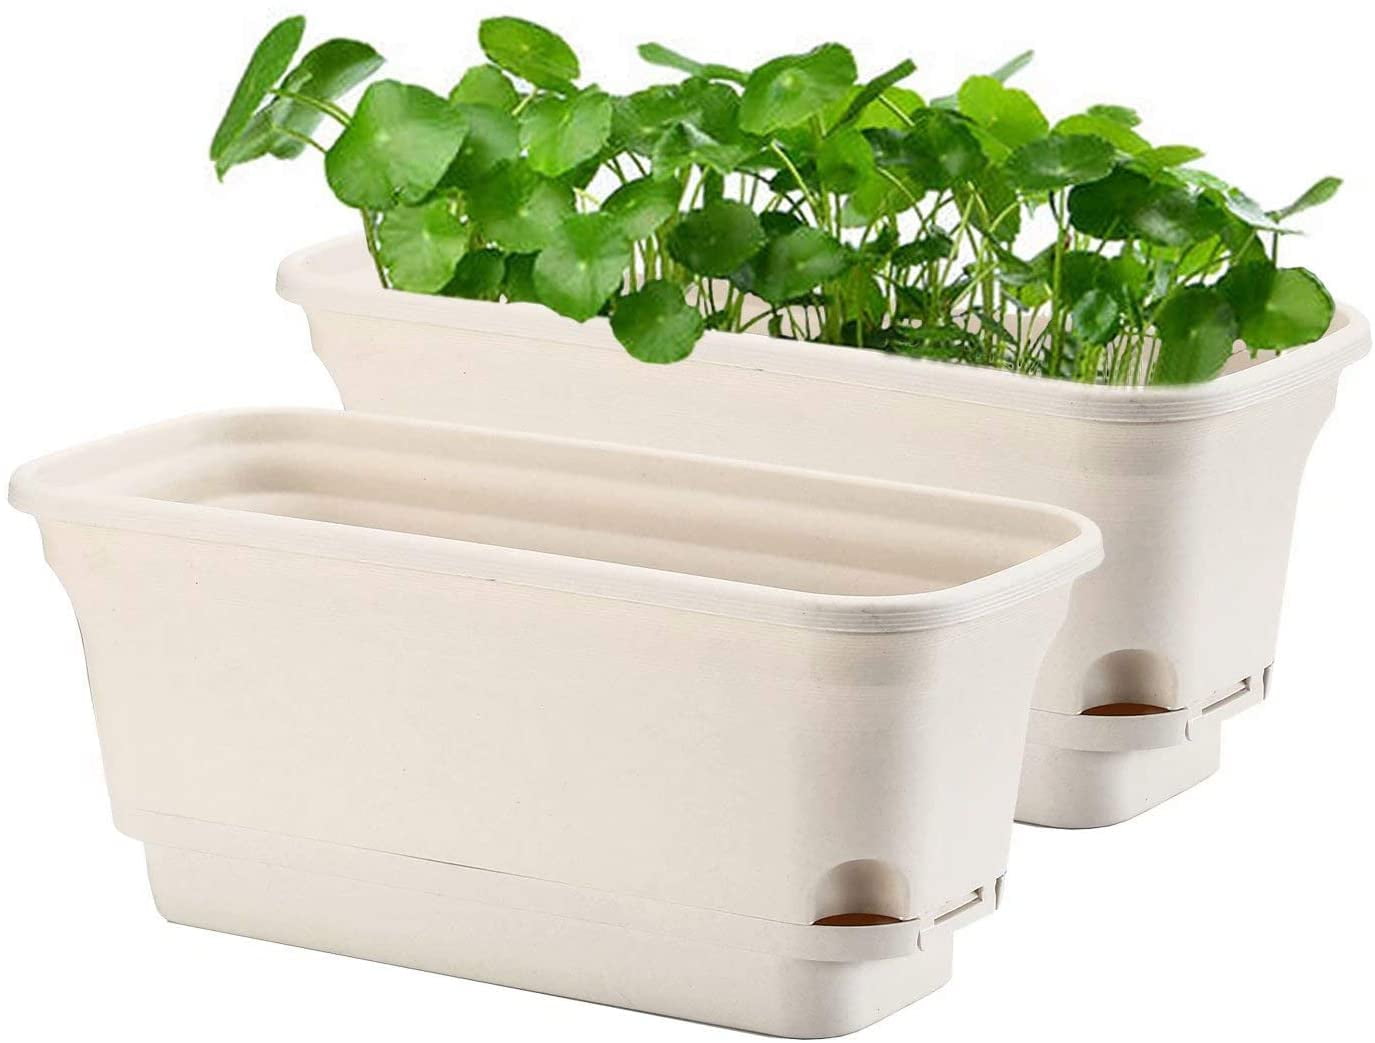 5 x 40cm Watering Tray Saucer Green Base Plant Pot Planter Window Sill 